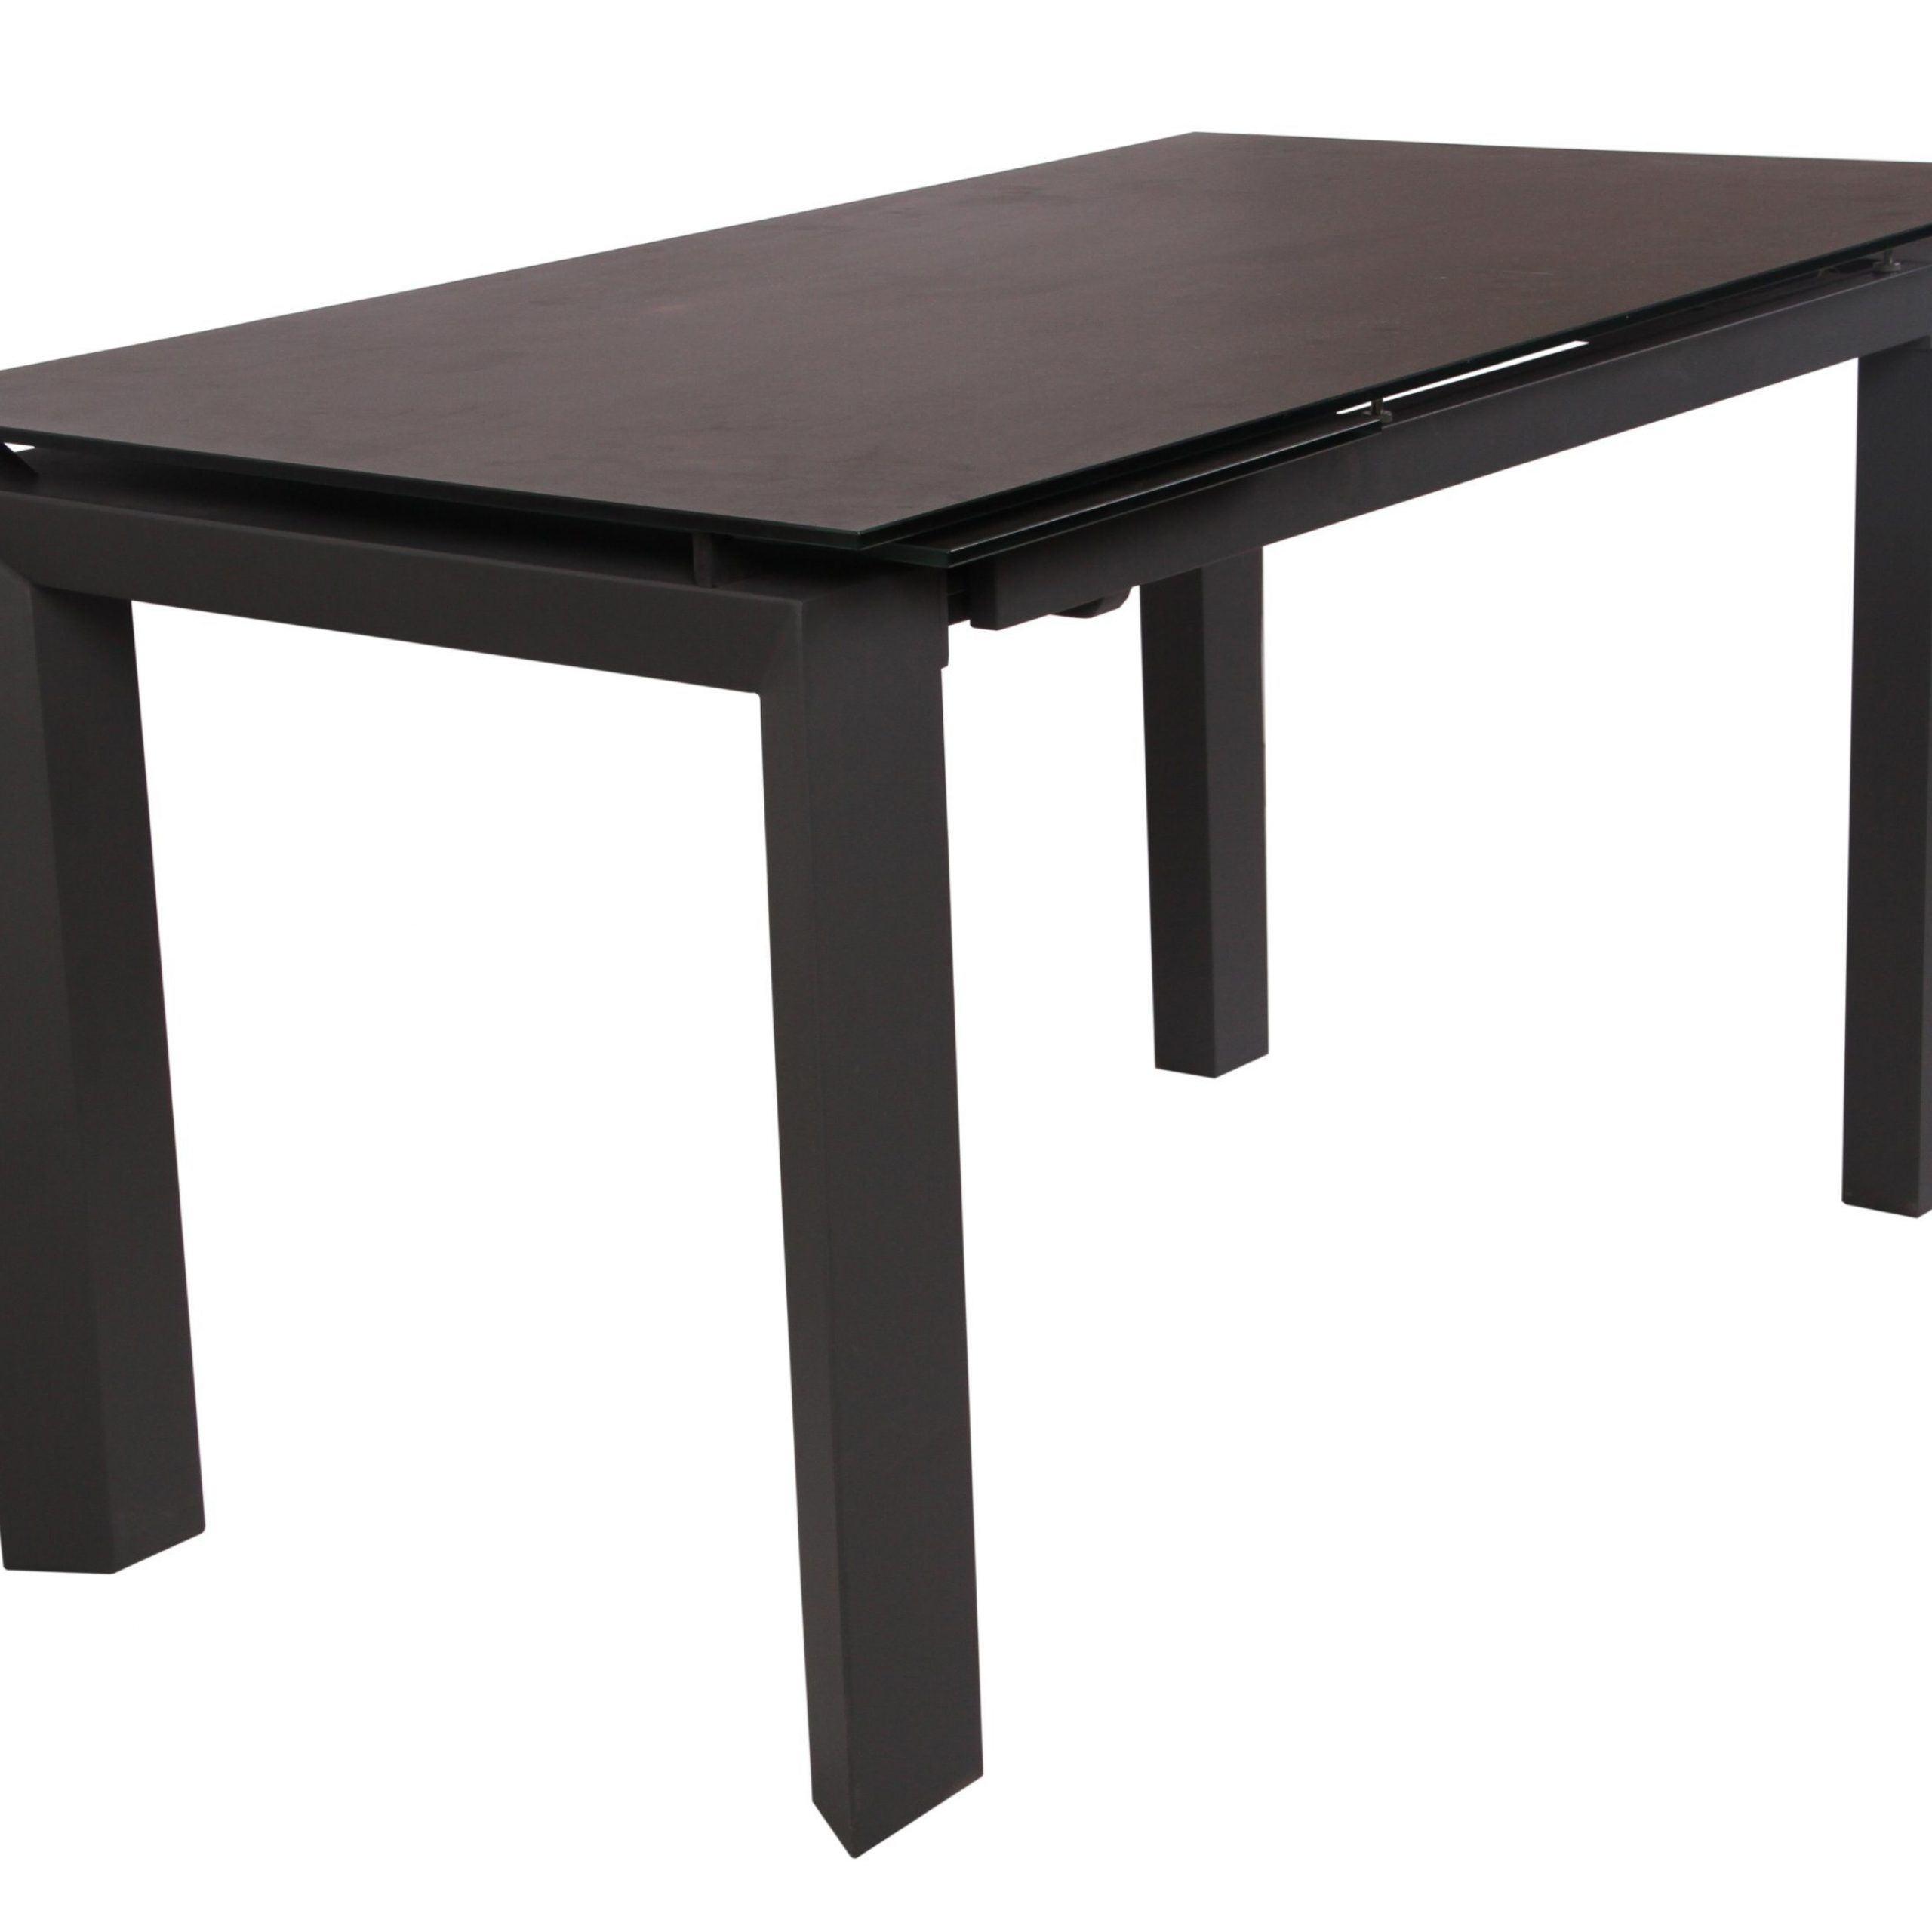 [%[hot Item] 10 15mm High Quality Iron Tempered Glass Dining Table Top With  Metal Leg In Most Popular Iron Wood Dining Tables With Metal Legs|iron Wood Dining Tables With Metal Legs In Well Known [hot Item] 10 15mm High Quality Iron Tempered Glass Dining Table Top With  Metal Leg|recent Iron Wood Dining Tables With Metal Legs Within [hot Item] 10 15mm High Quality Iron Tempered Glass Dining Table Top With  Metal Leg|most Recent [hot Item] 10 15mm High Quality Iron Tempered Glass Dining Table Top With  Metal Leg Within Iron Wood Dining Tables With Metal Legs%] (View 12 of 25)